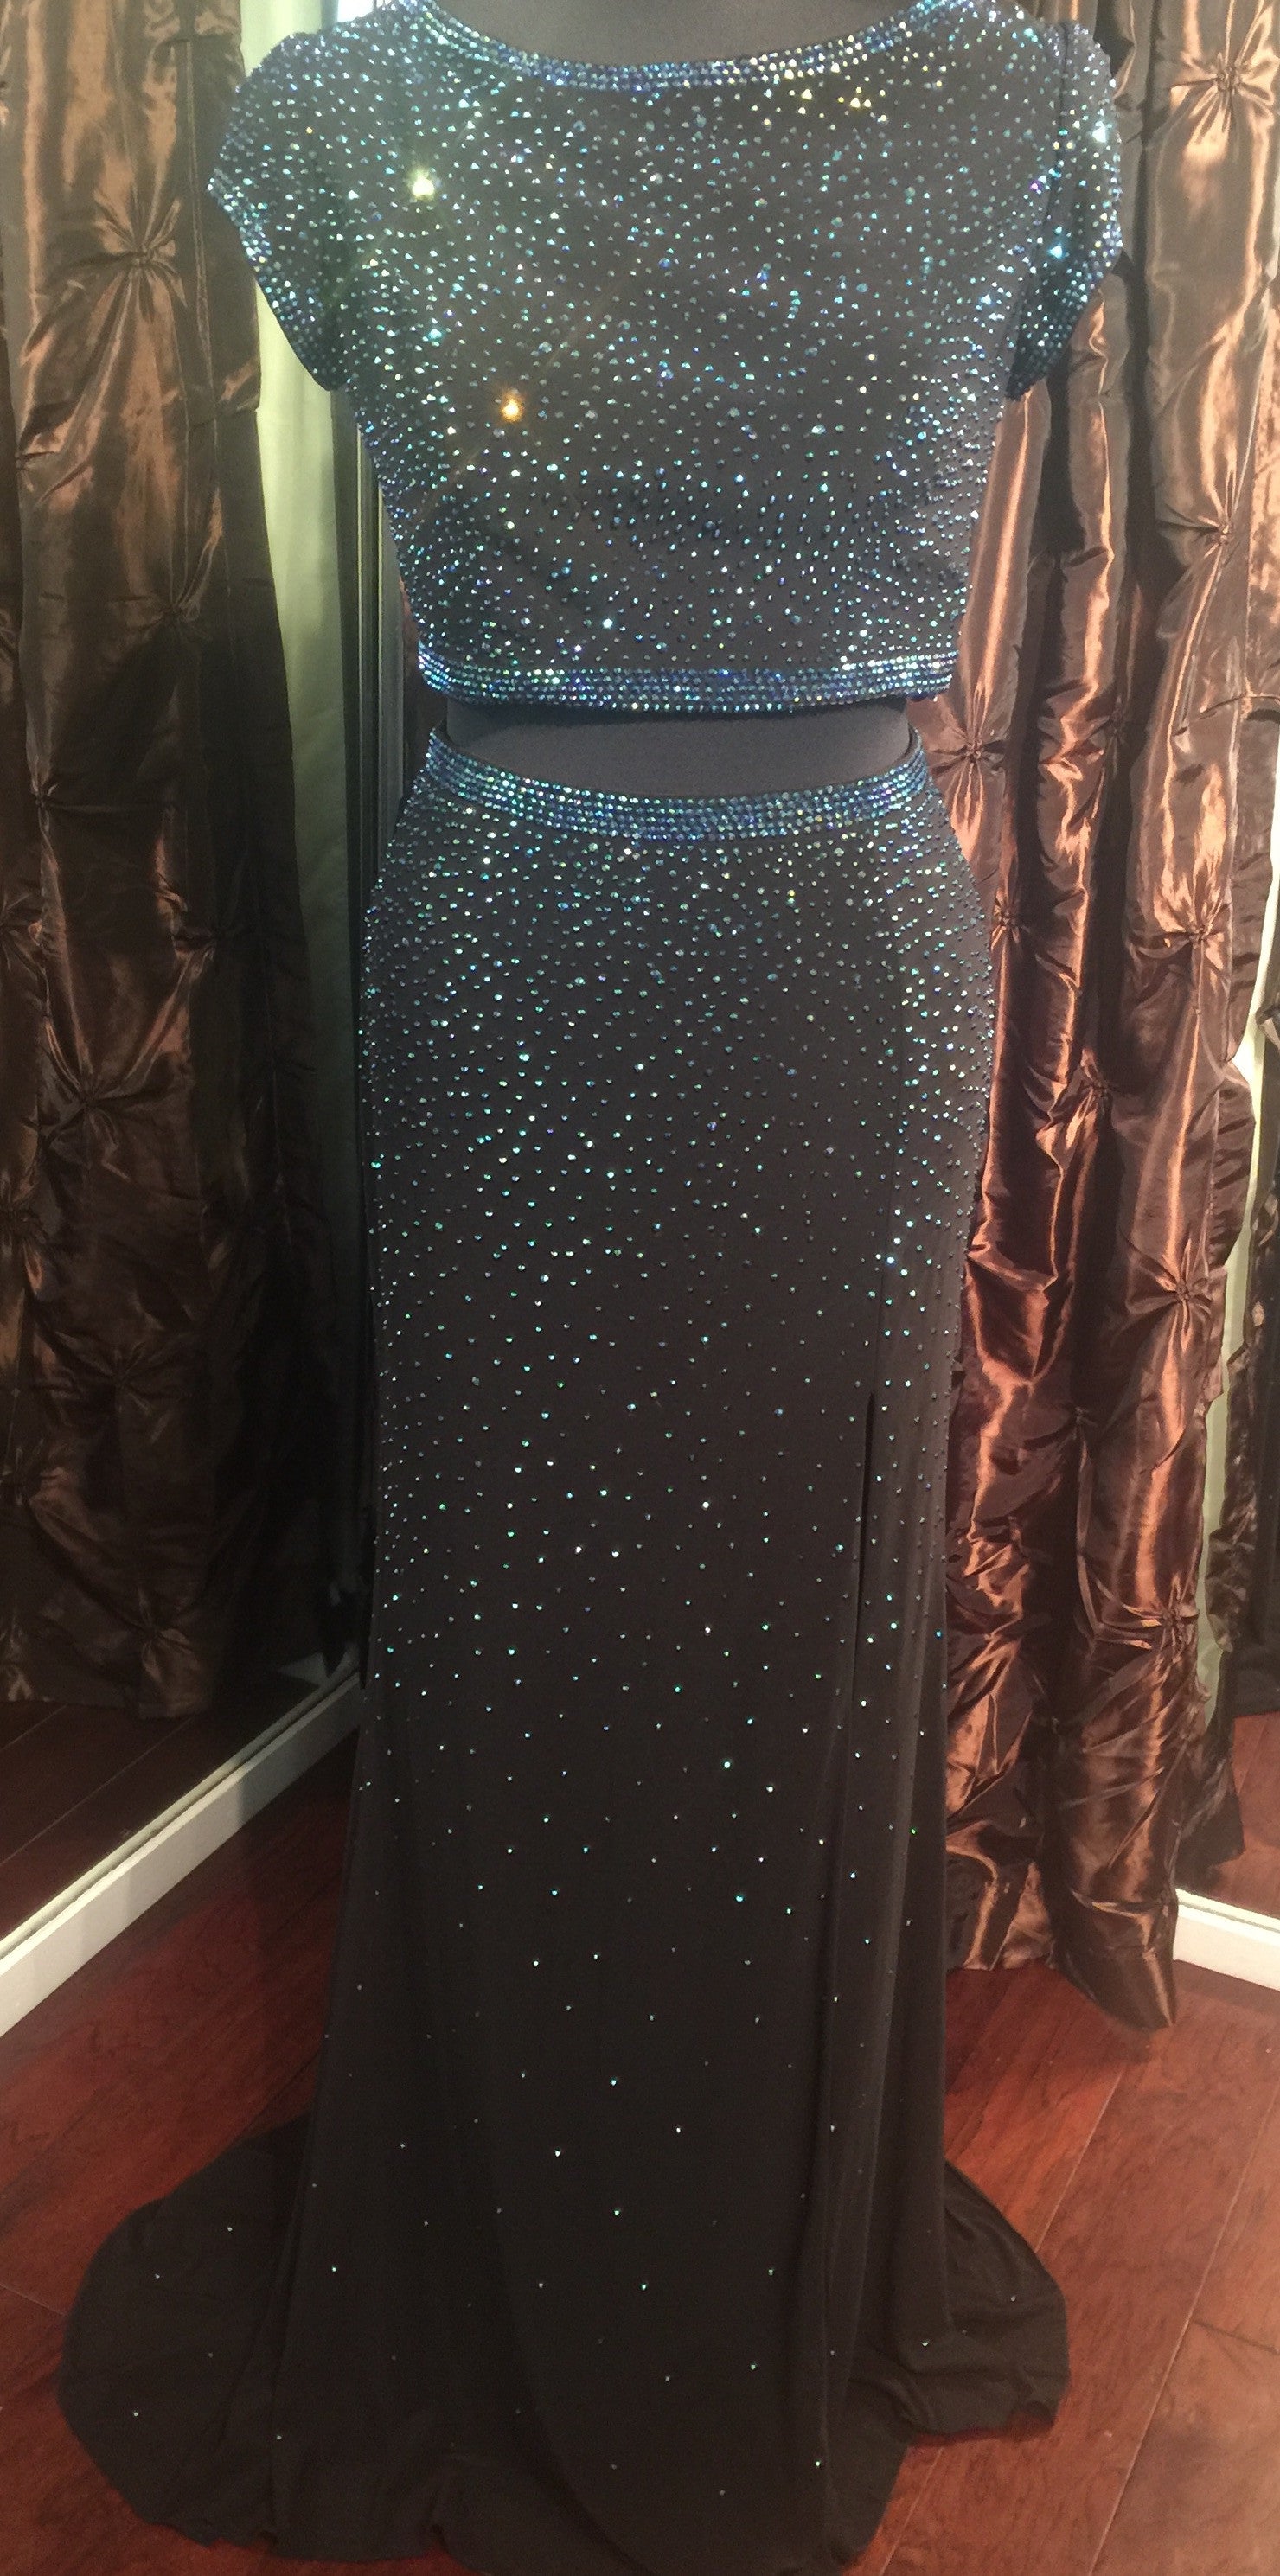 Jovani JVN 36743 JVN36743 Beautiful two-piece prom gown features an open back and sexy slit with cap sleeve top and hot stones set throughout for that extra bling.  two piece prom dress cap sleeve slit backless cut out.  Size 10 Black